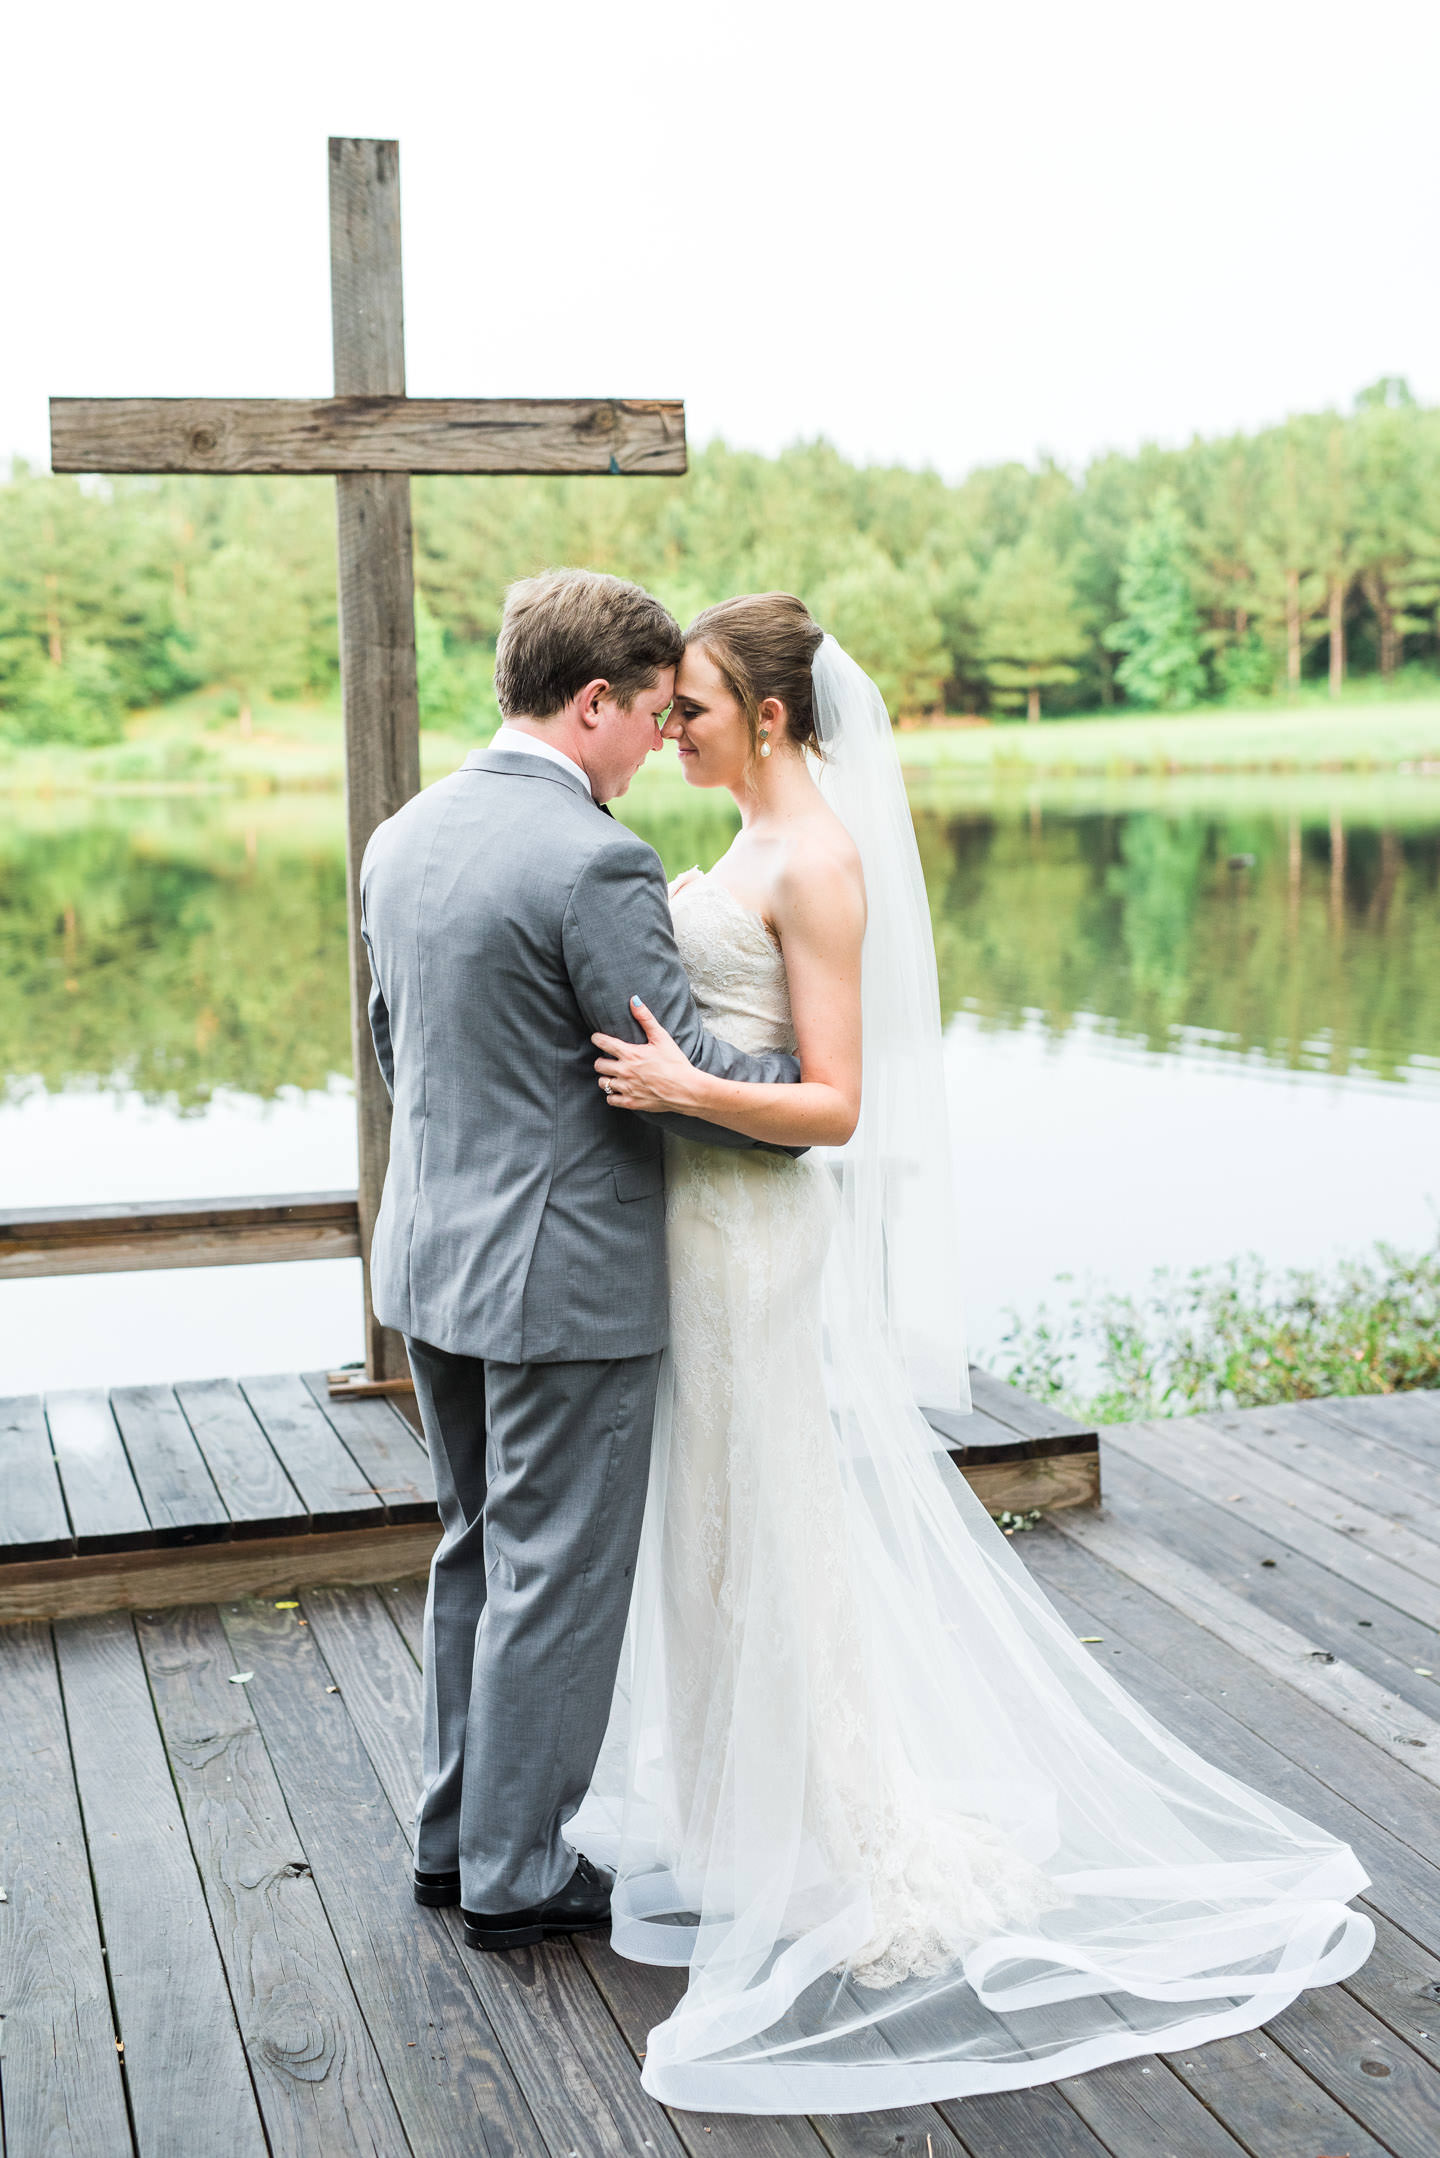 Serene portrait of Bride and Groom hugging in front of lake following their Mississippi outdoor wedding ceremony